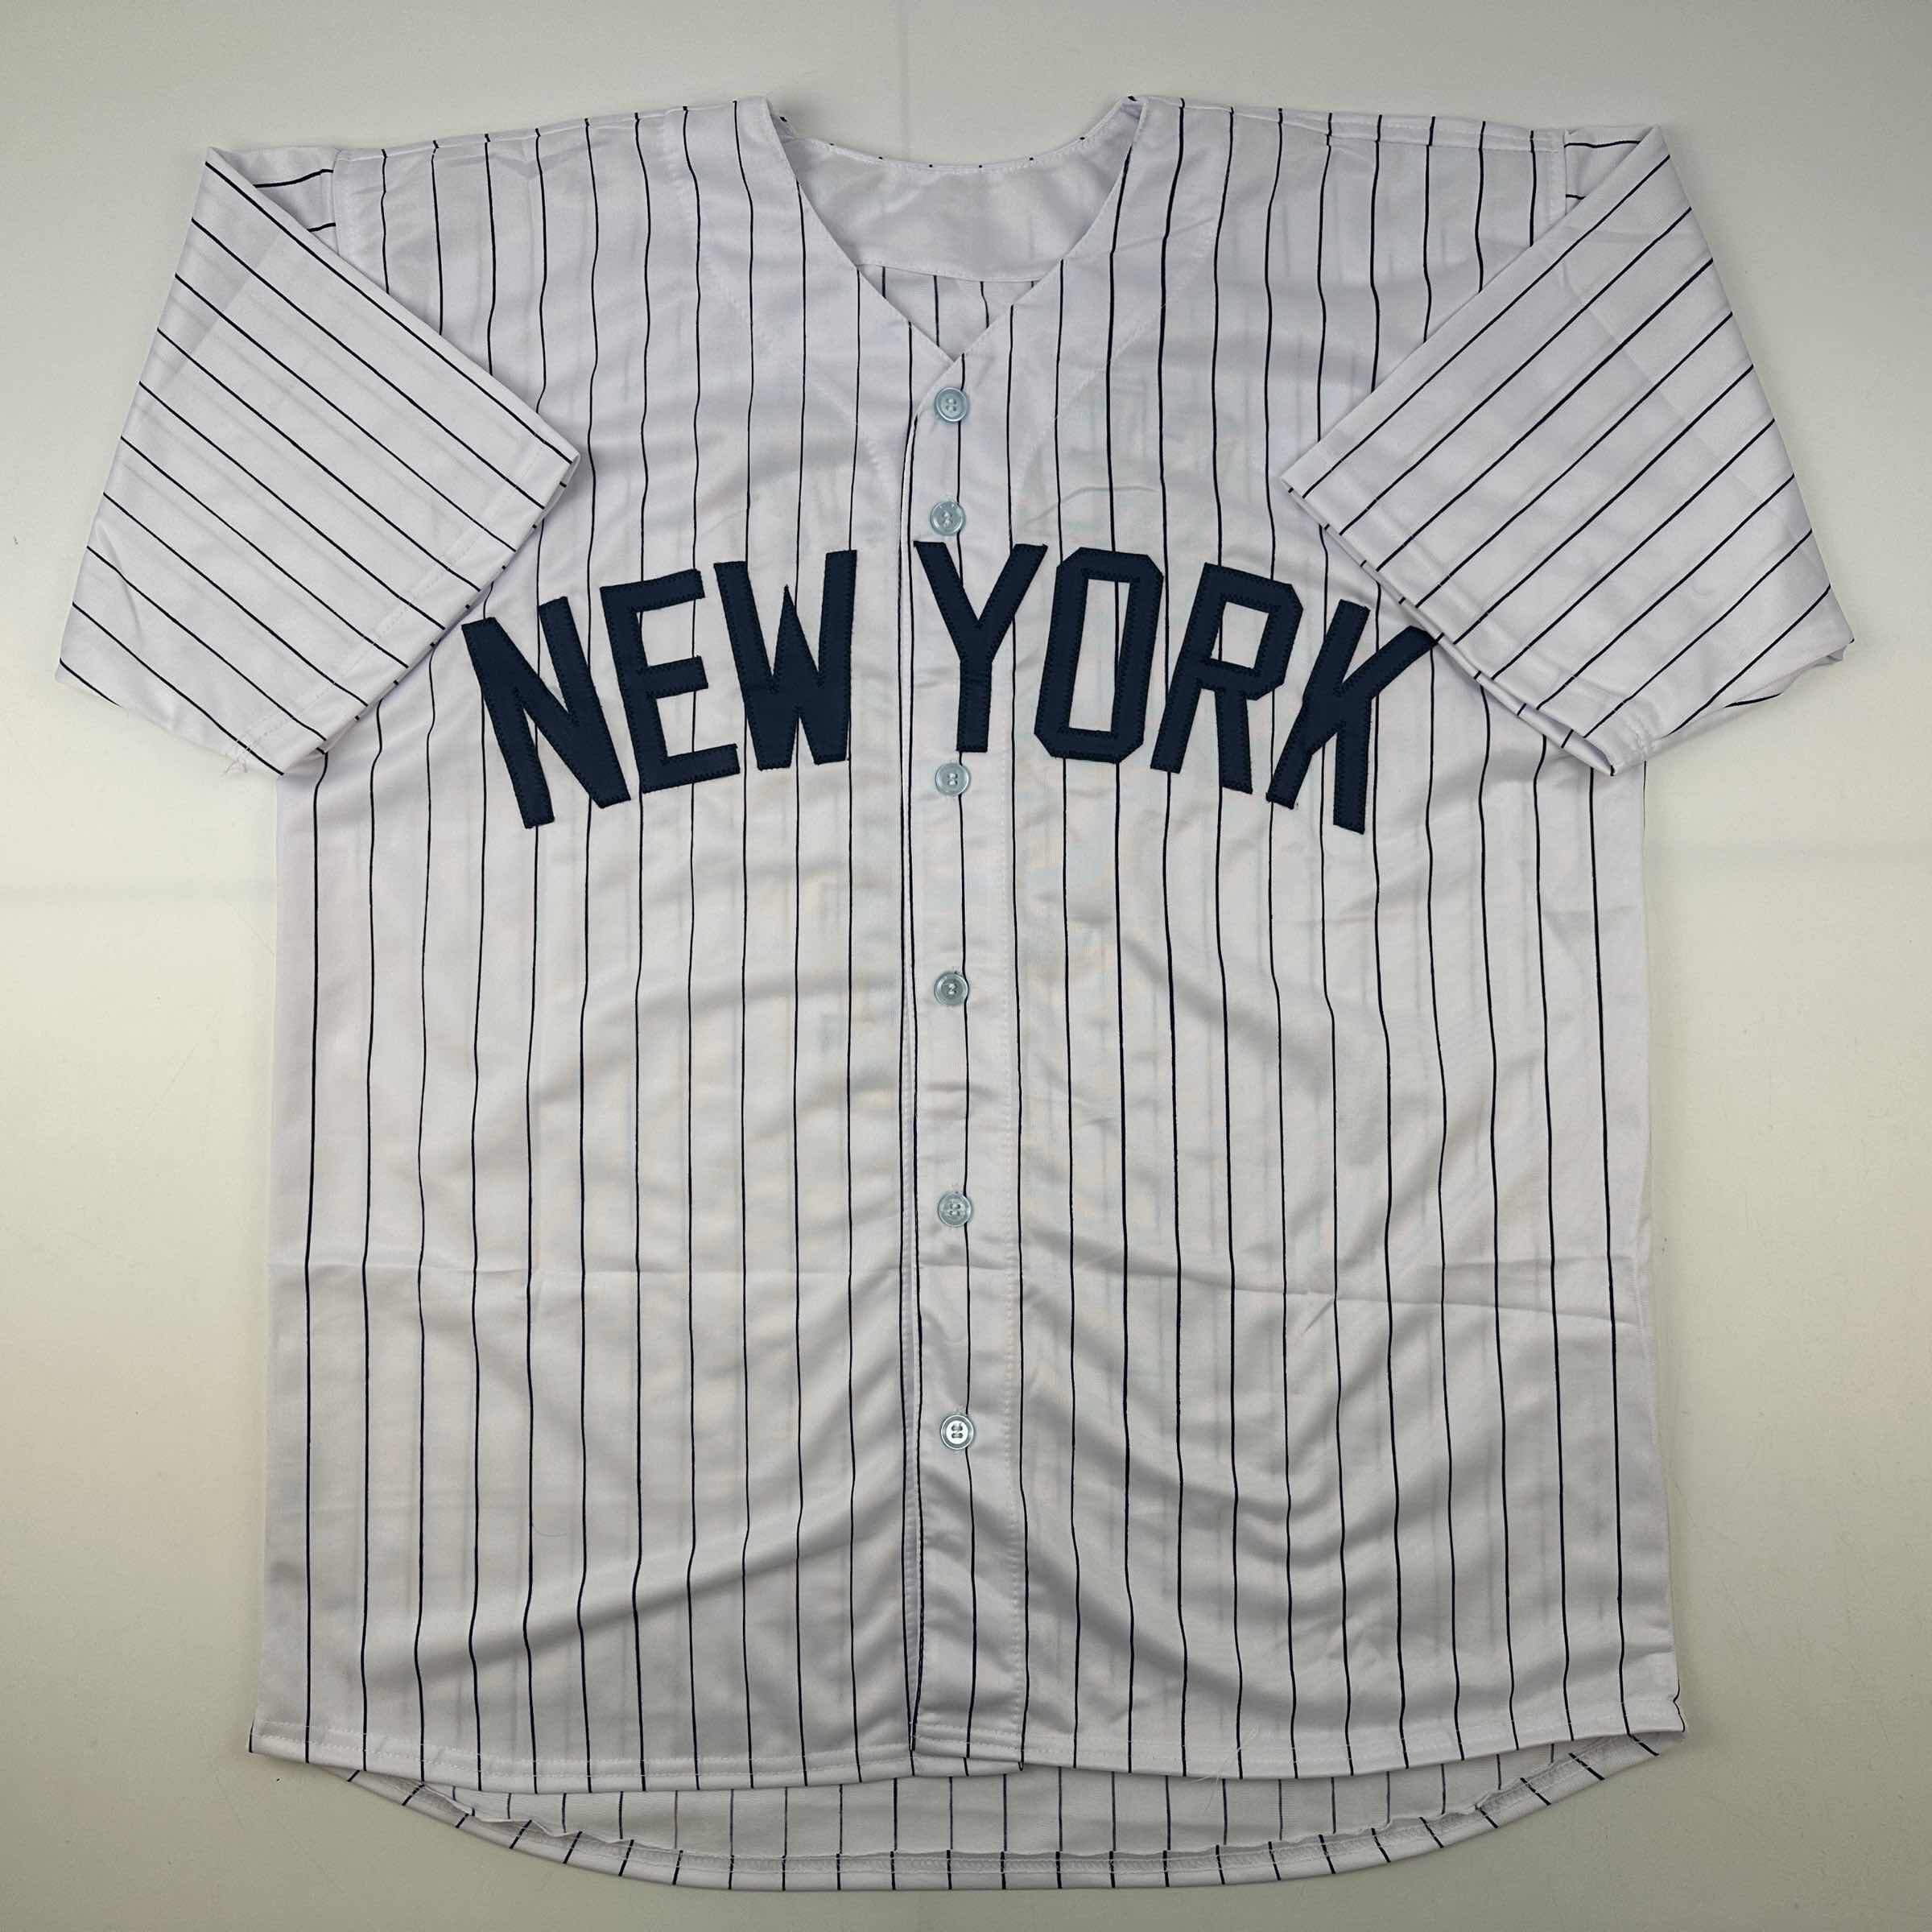 lou gehrig jersey for sale